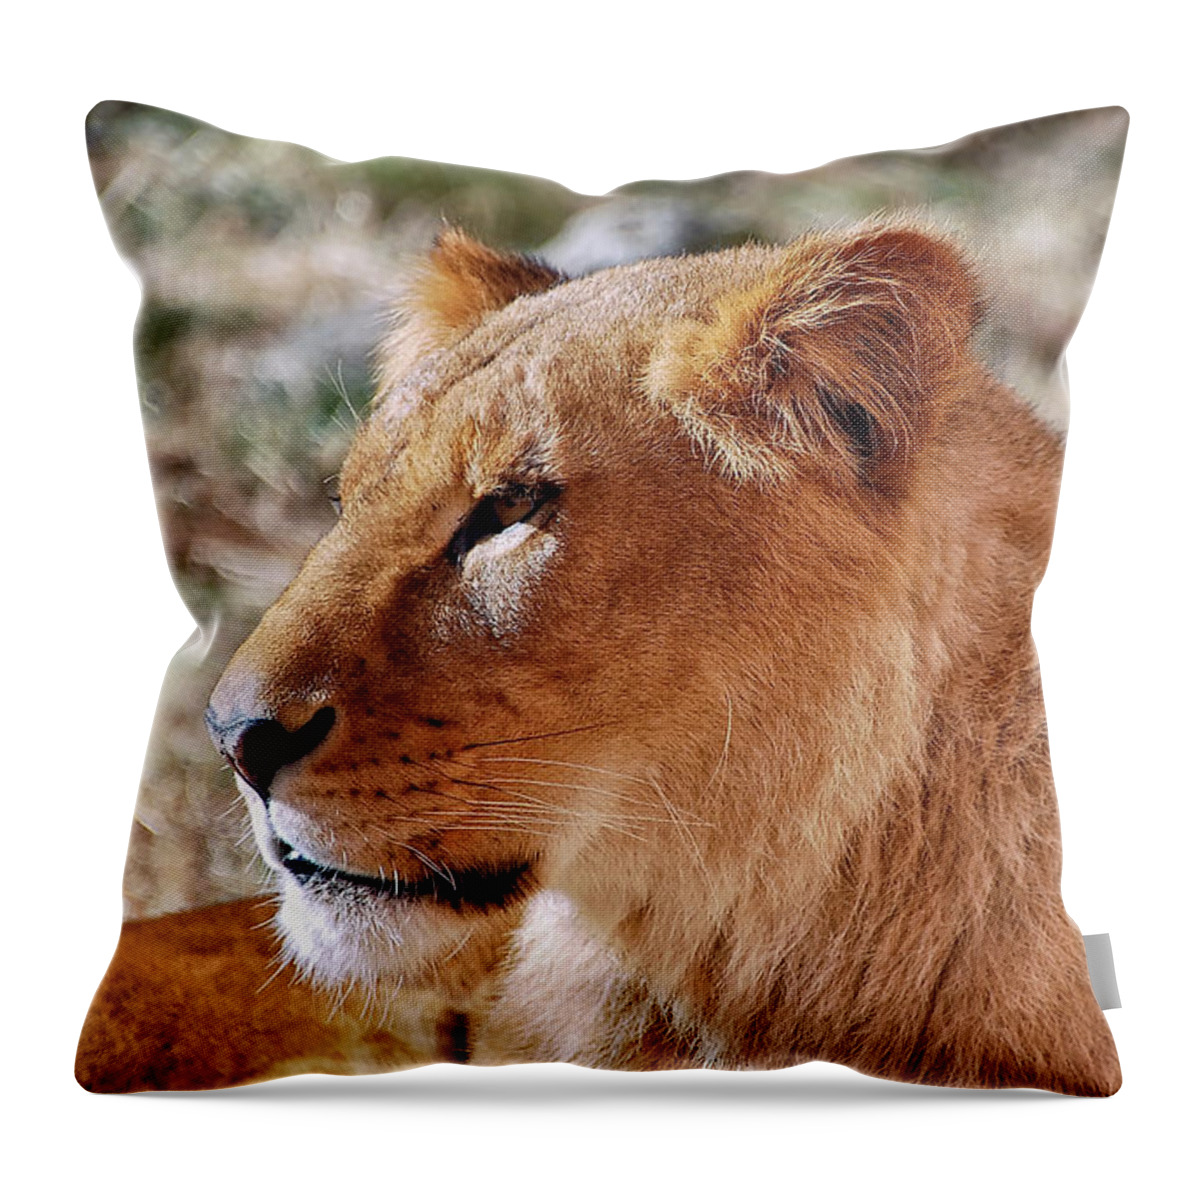 Lion Throw Pillow featuring the photograph Lion around by Kuni Photography